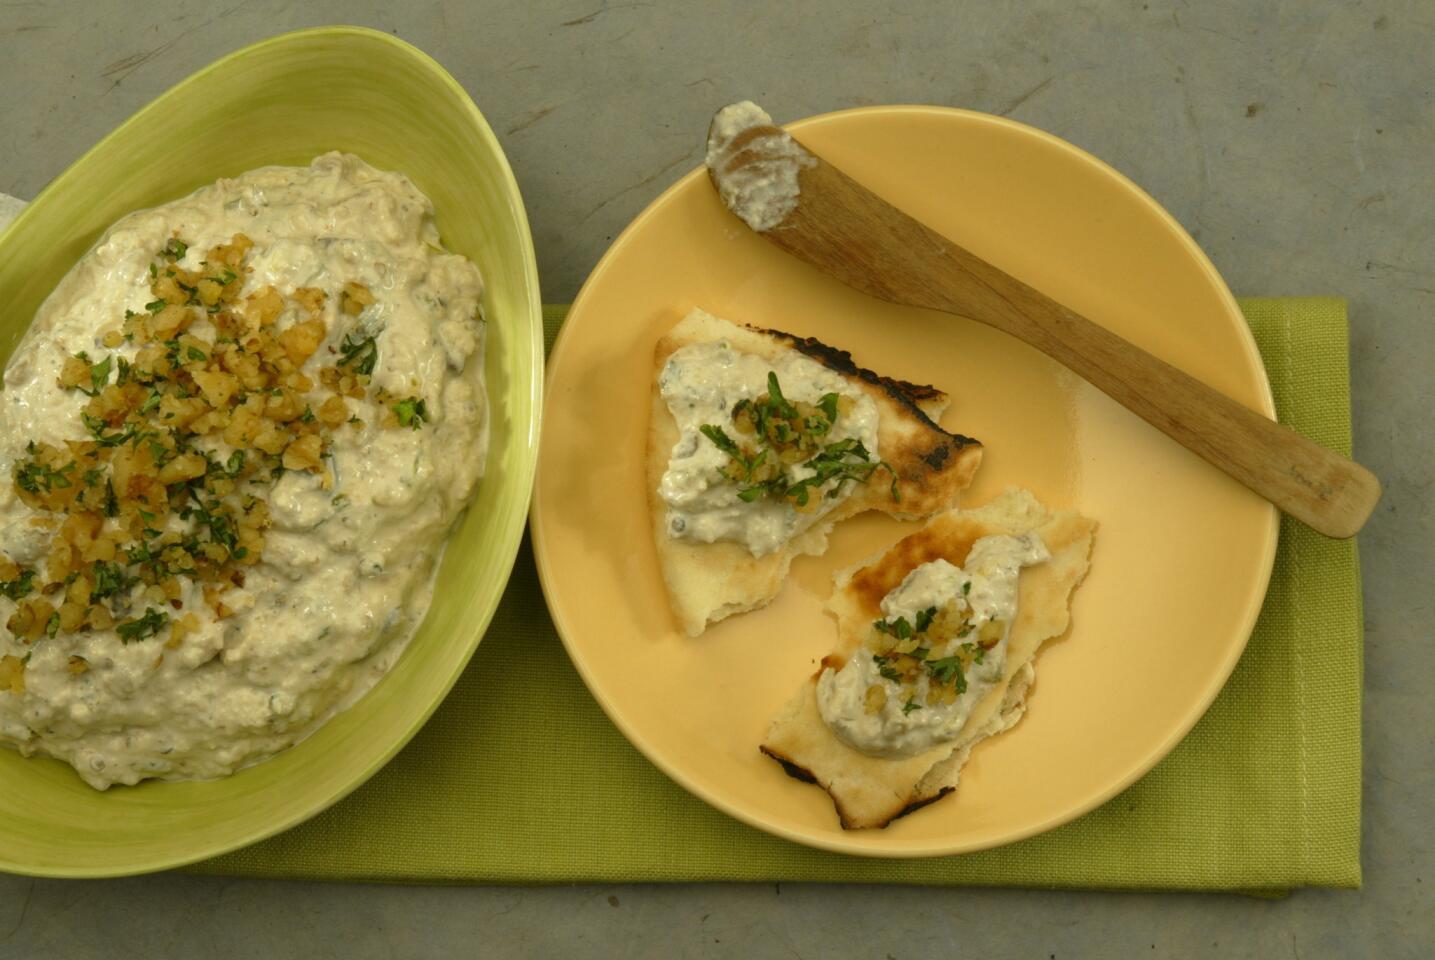 Roasted eggplant dip with walnuts